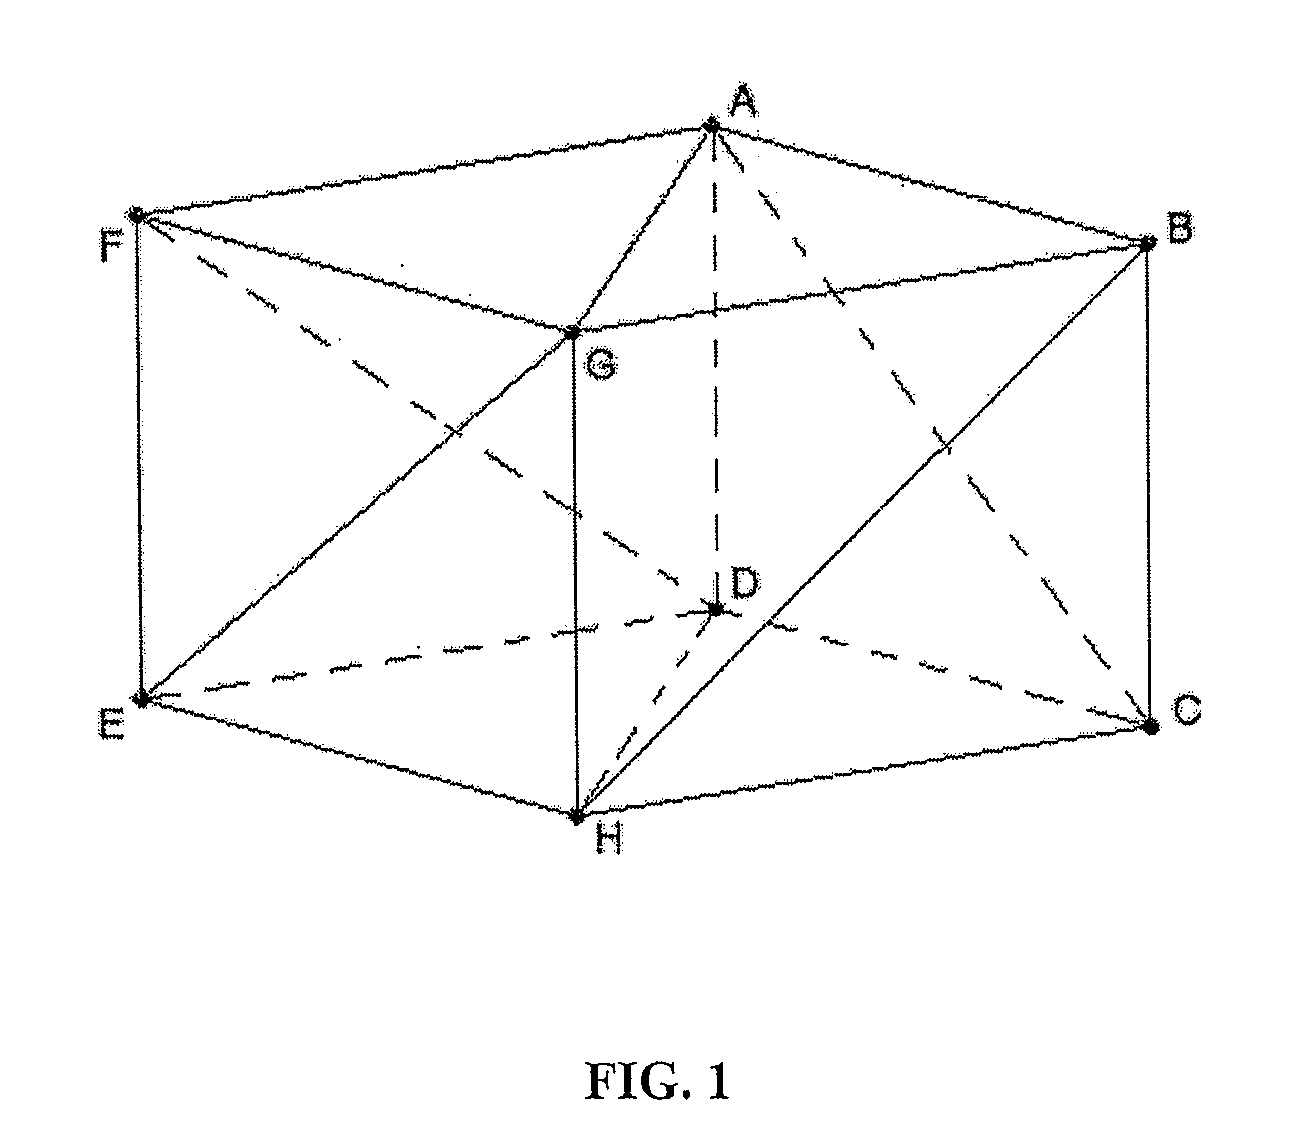 Method for modeling and animating object trajectories in three-dimensional space